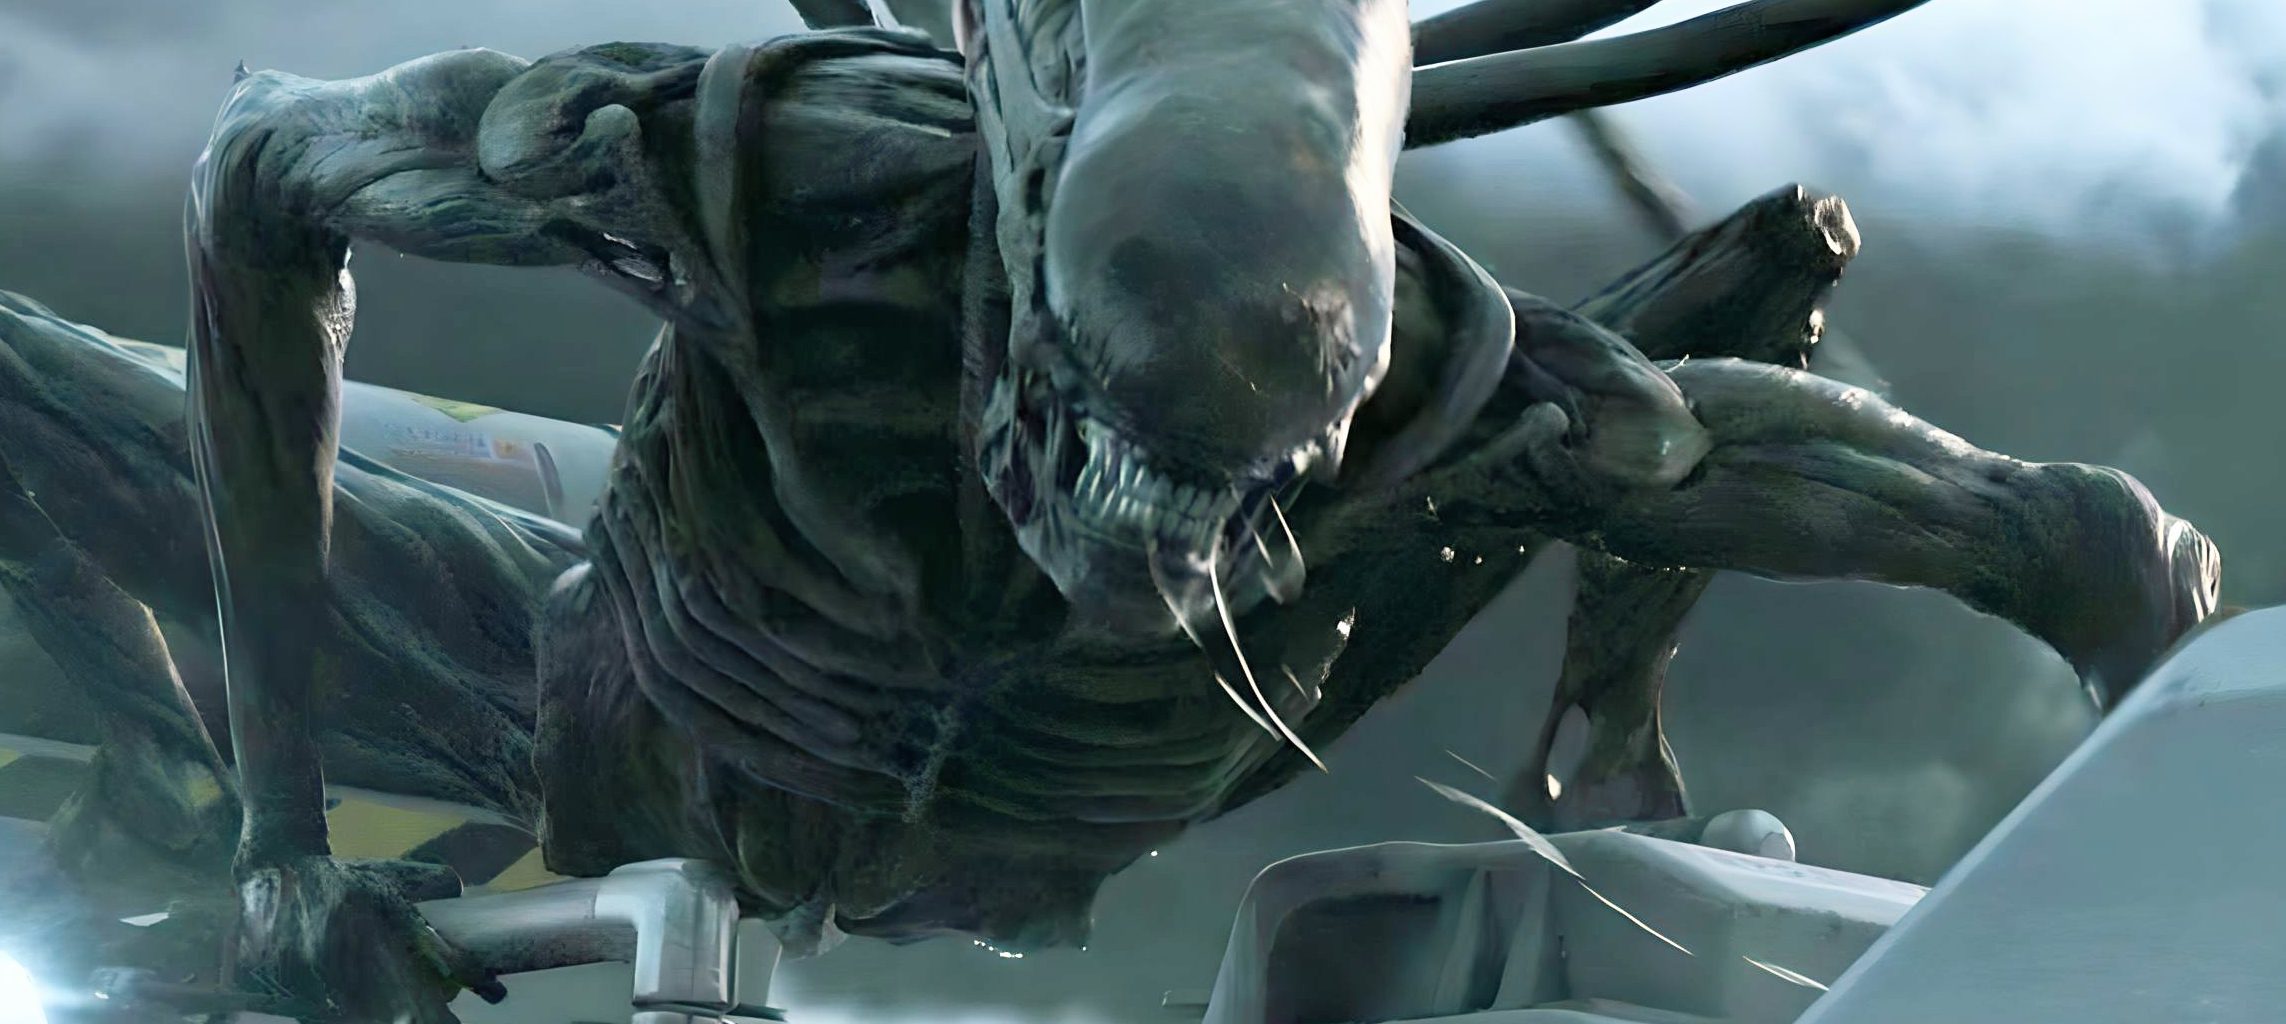 A Second Alien Series Reportedly in Development at Hulu